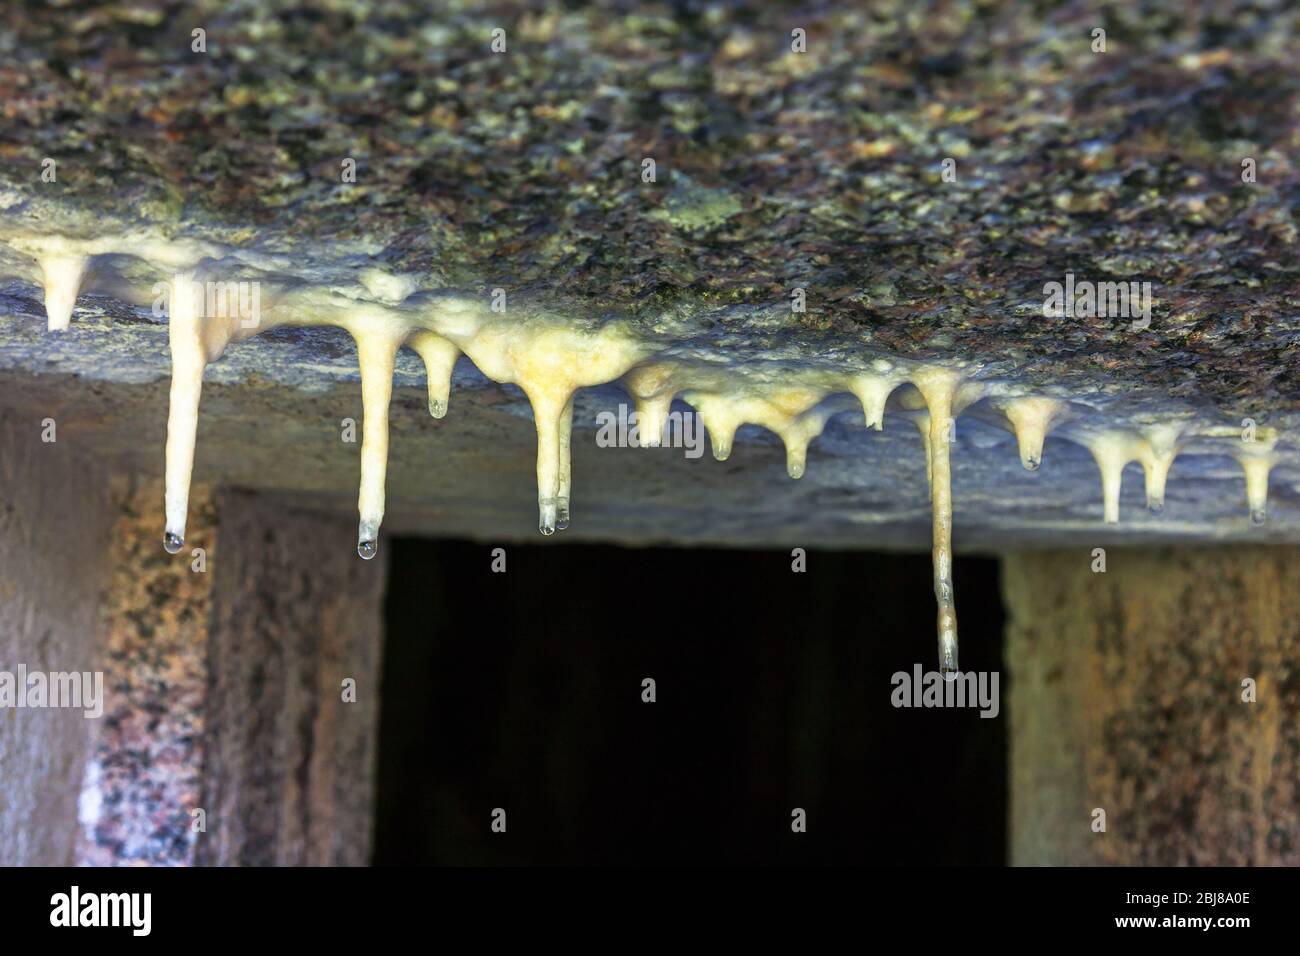 Stalactites on the ceiling with drops Stock Photo